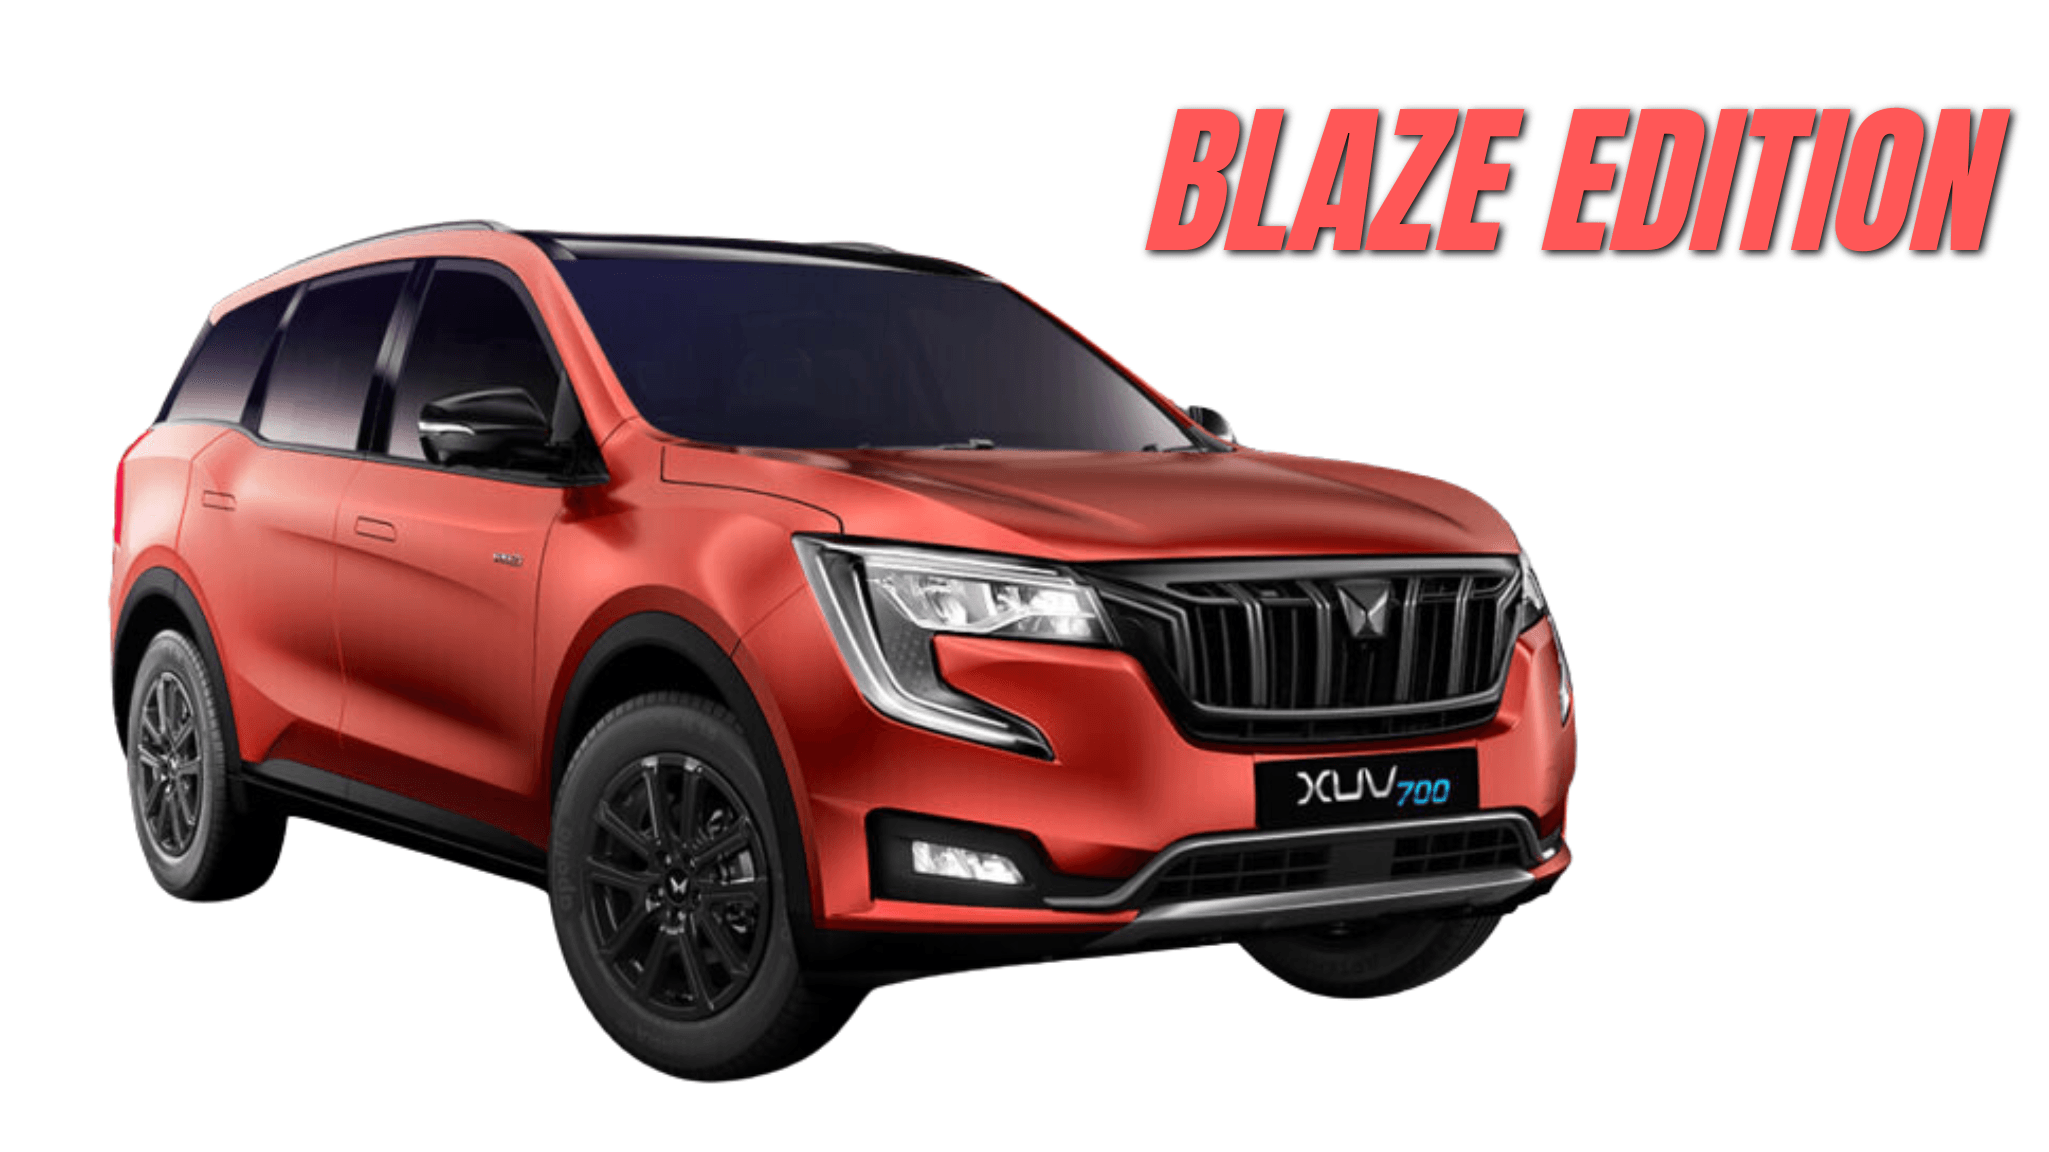 Mahindra XUV700 Blaze Edition Launched at ₹4.24 Lakh: What's New? news